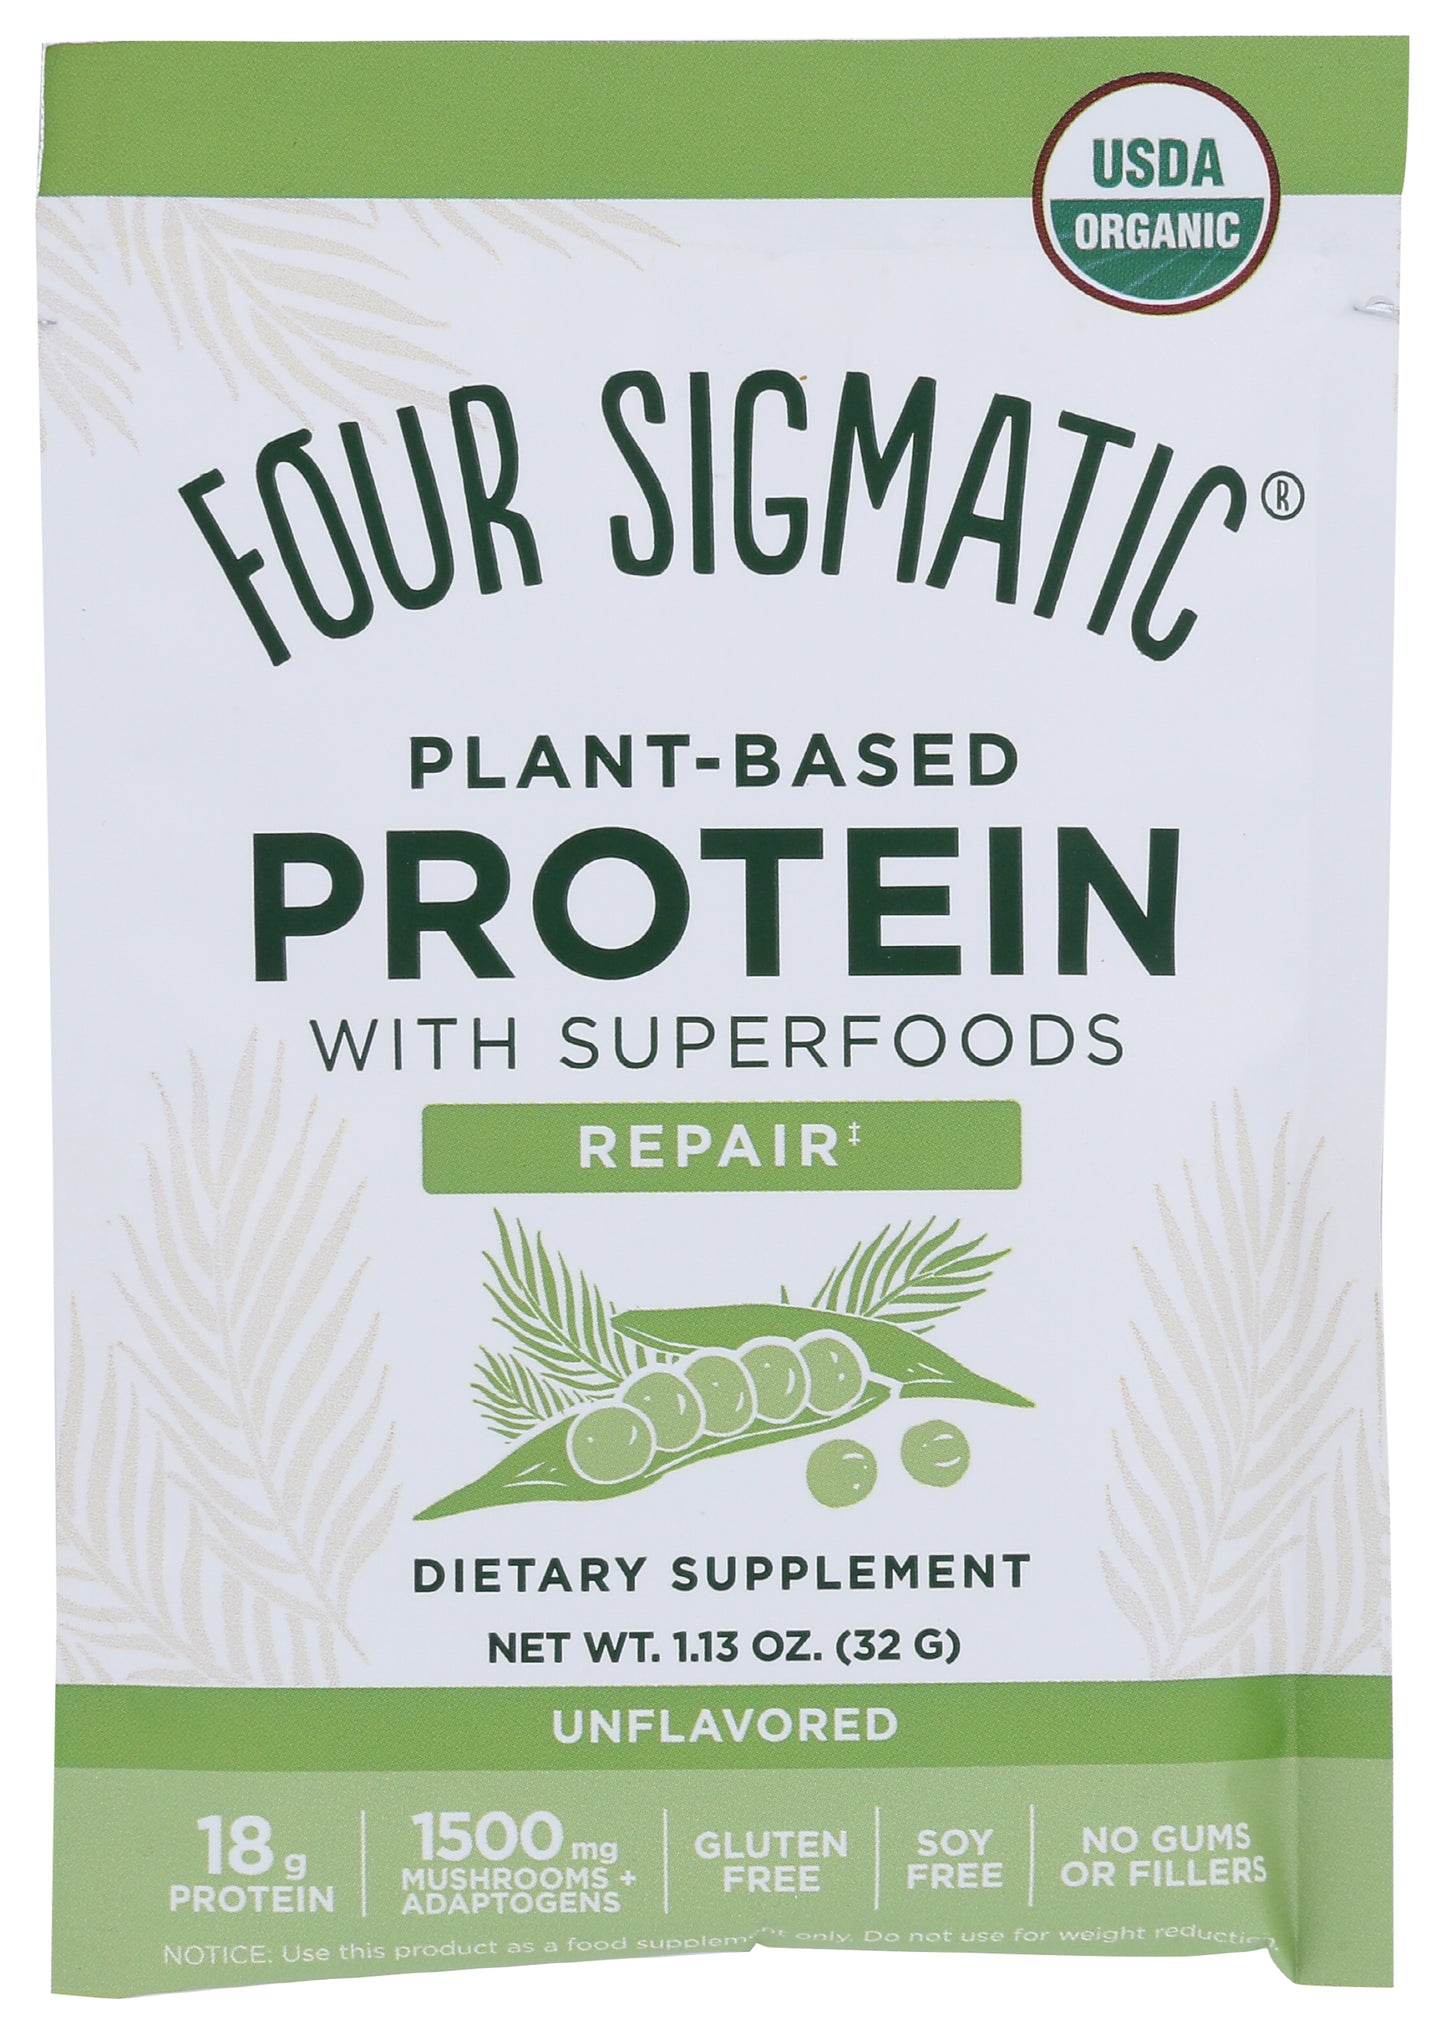 Four Sigmatic Plant-Based Protein Powder Unflavored 32g Front of Packet